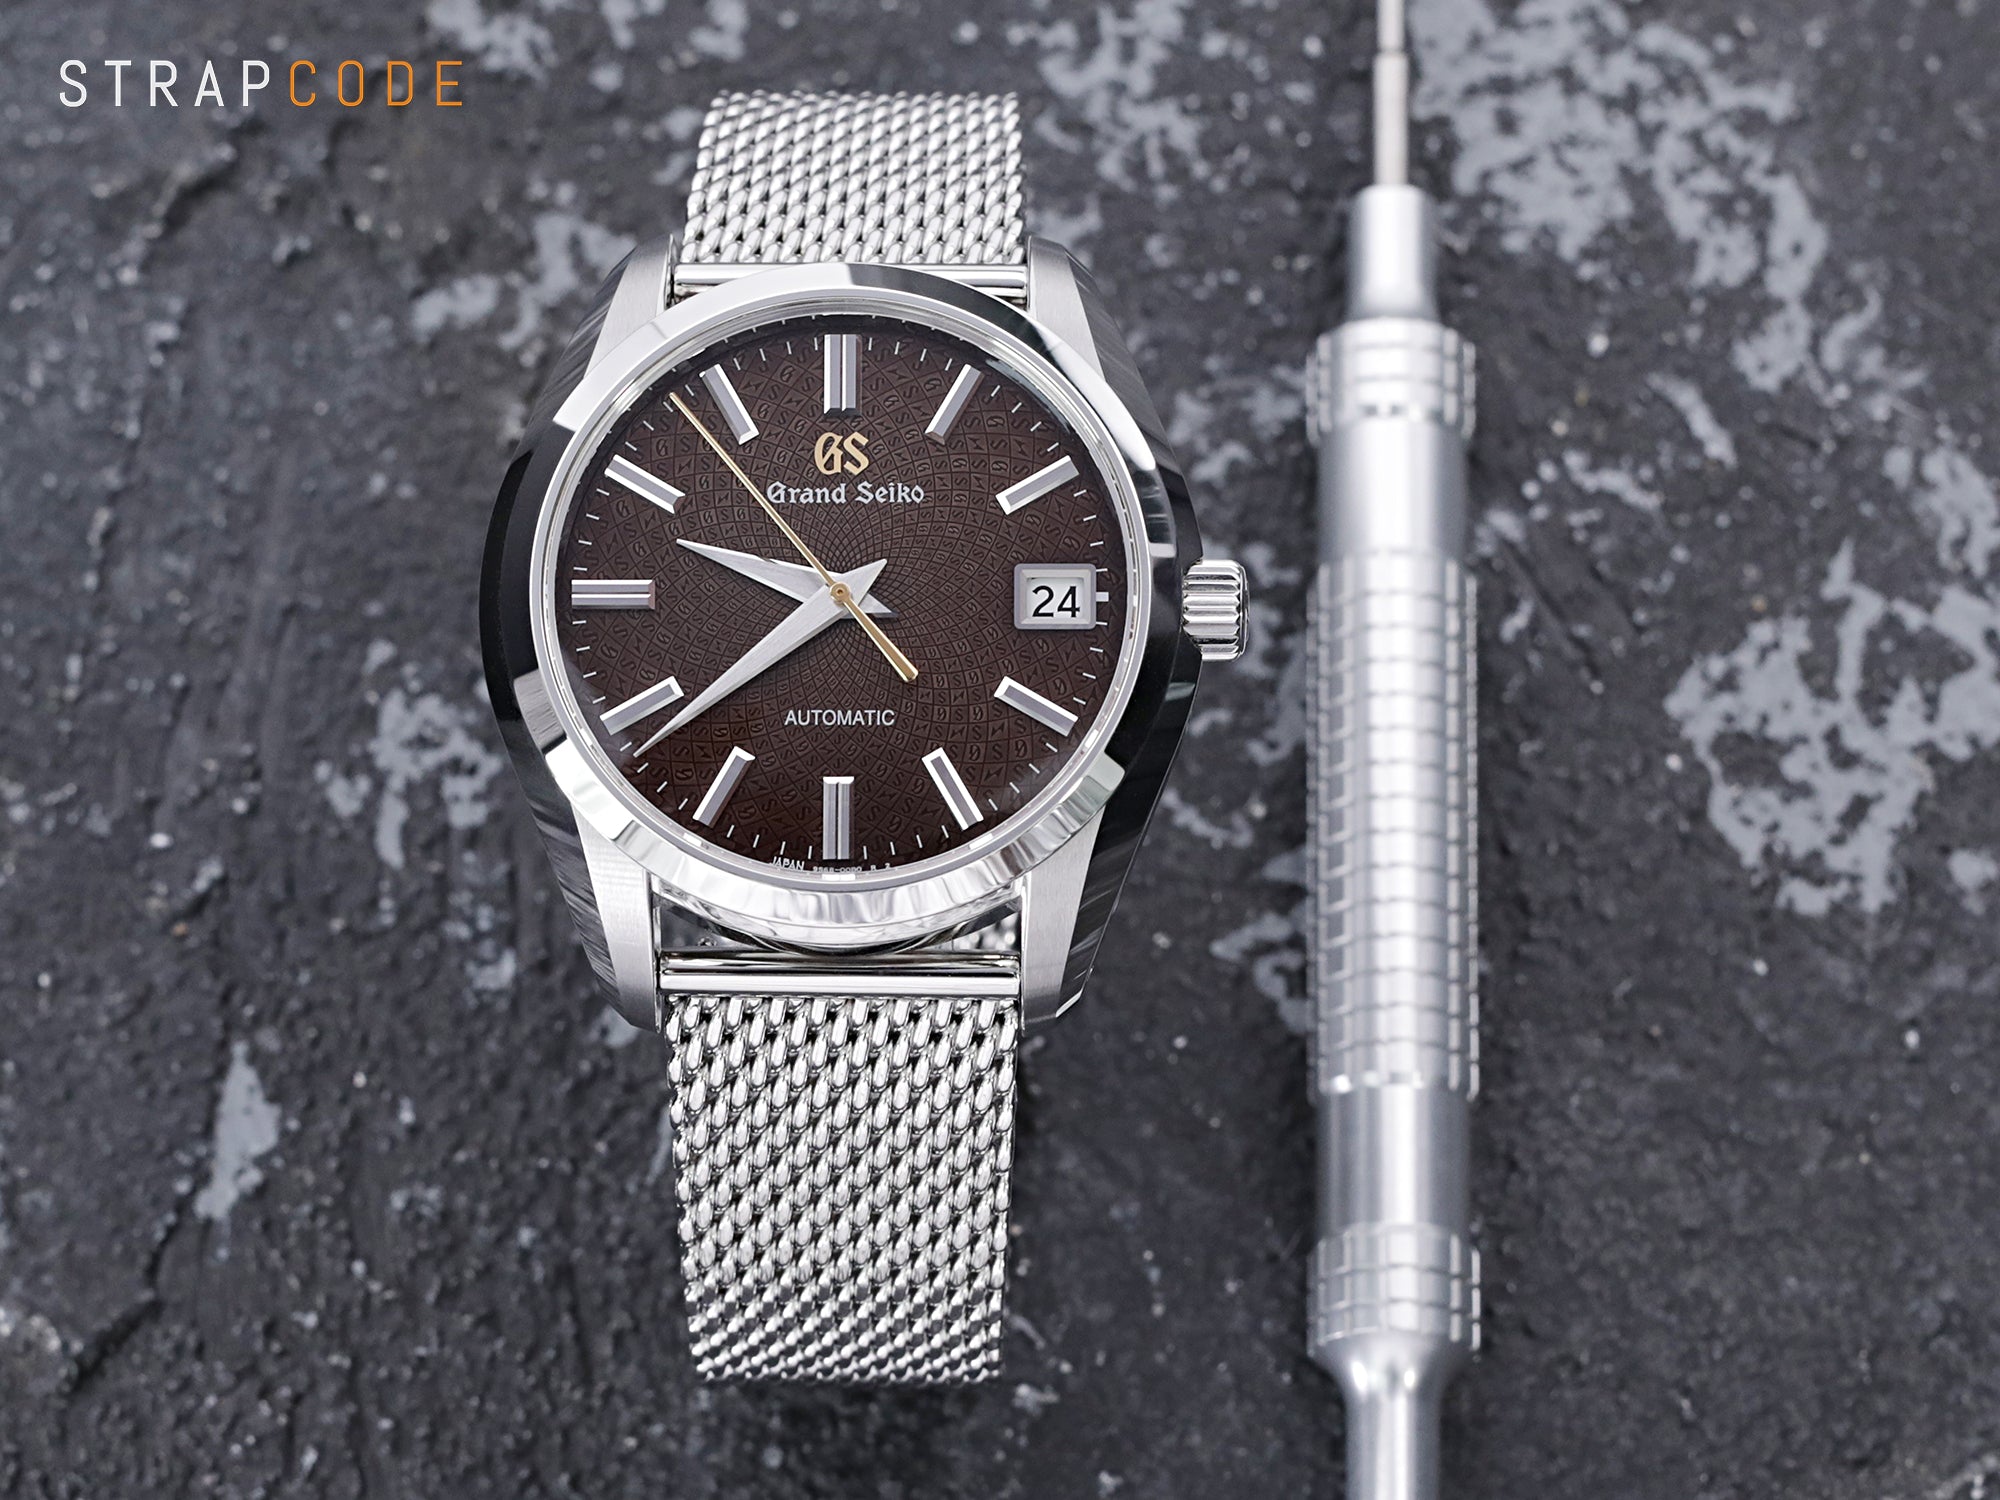 Making the Grand Seiko SBGR311 reliable and accurate in most everyday environments, by Strapcode watch bands